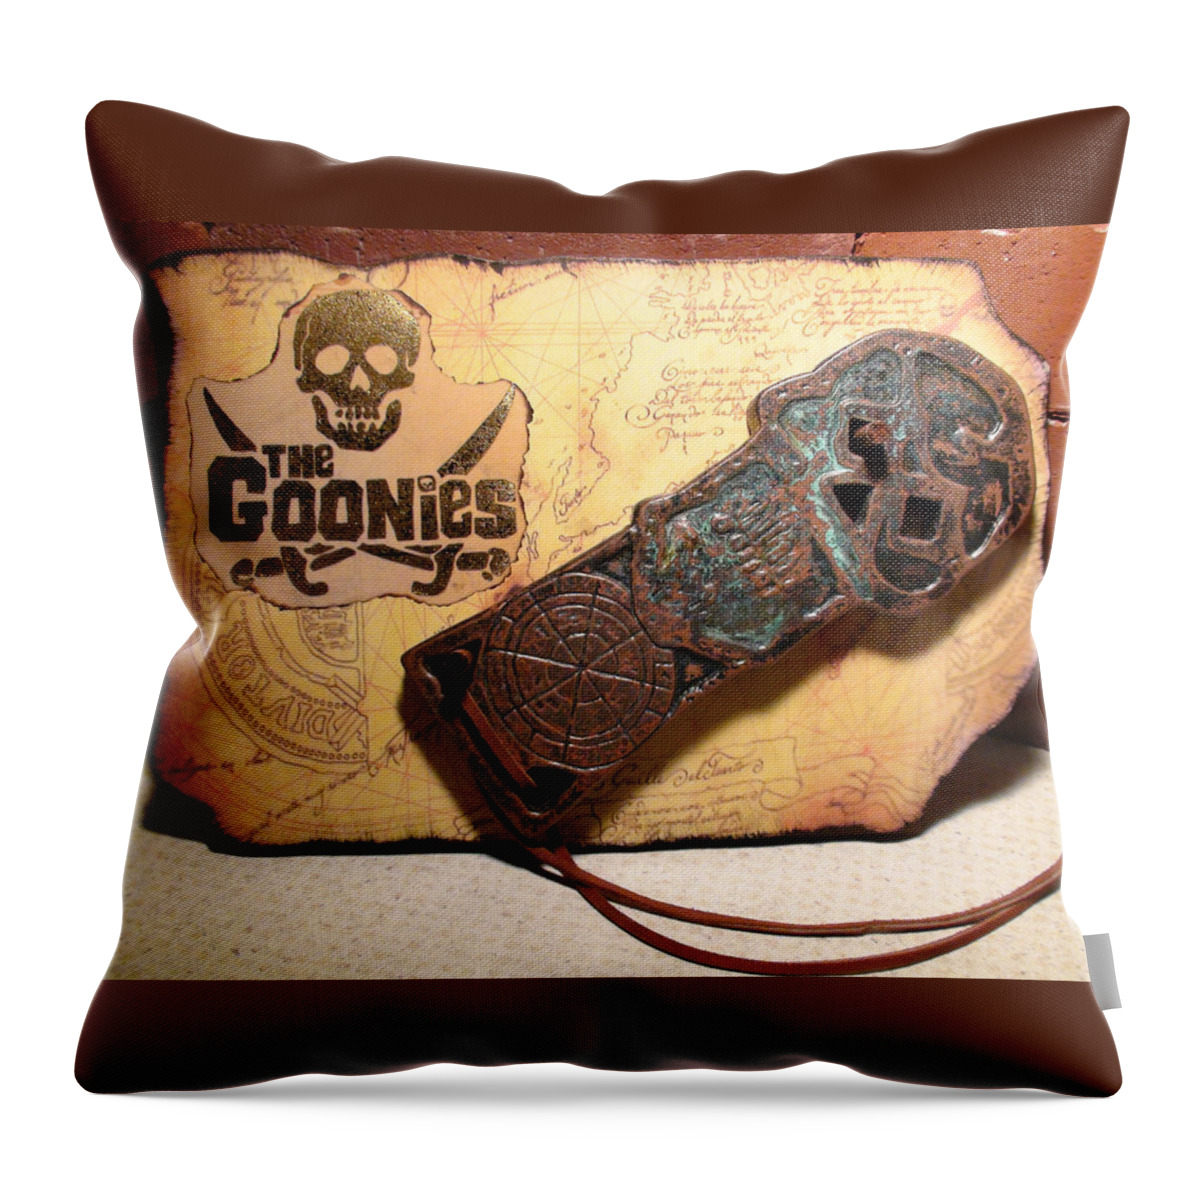 The Goonies Throw Pillow featuring the digital art The Goonies by Maye Loeser